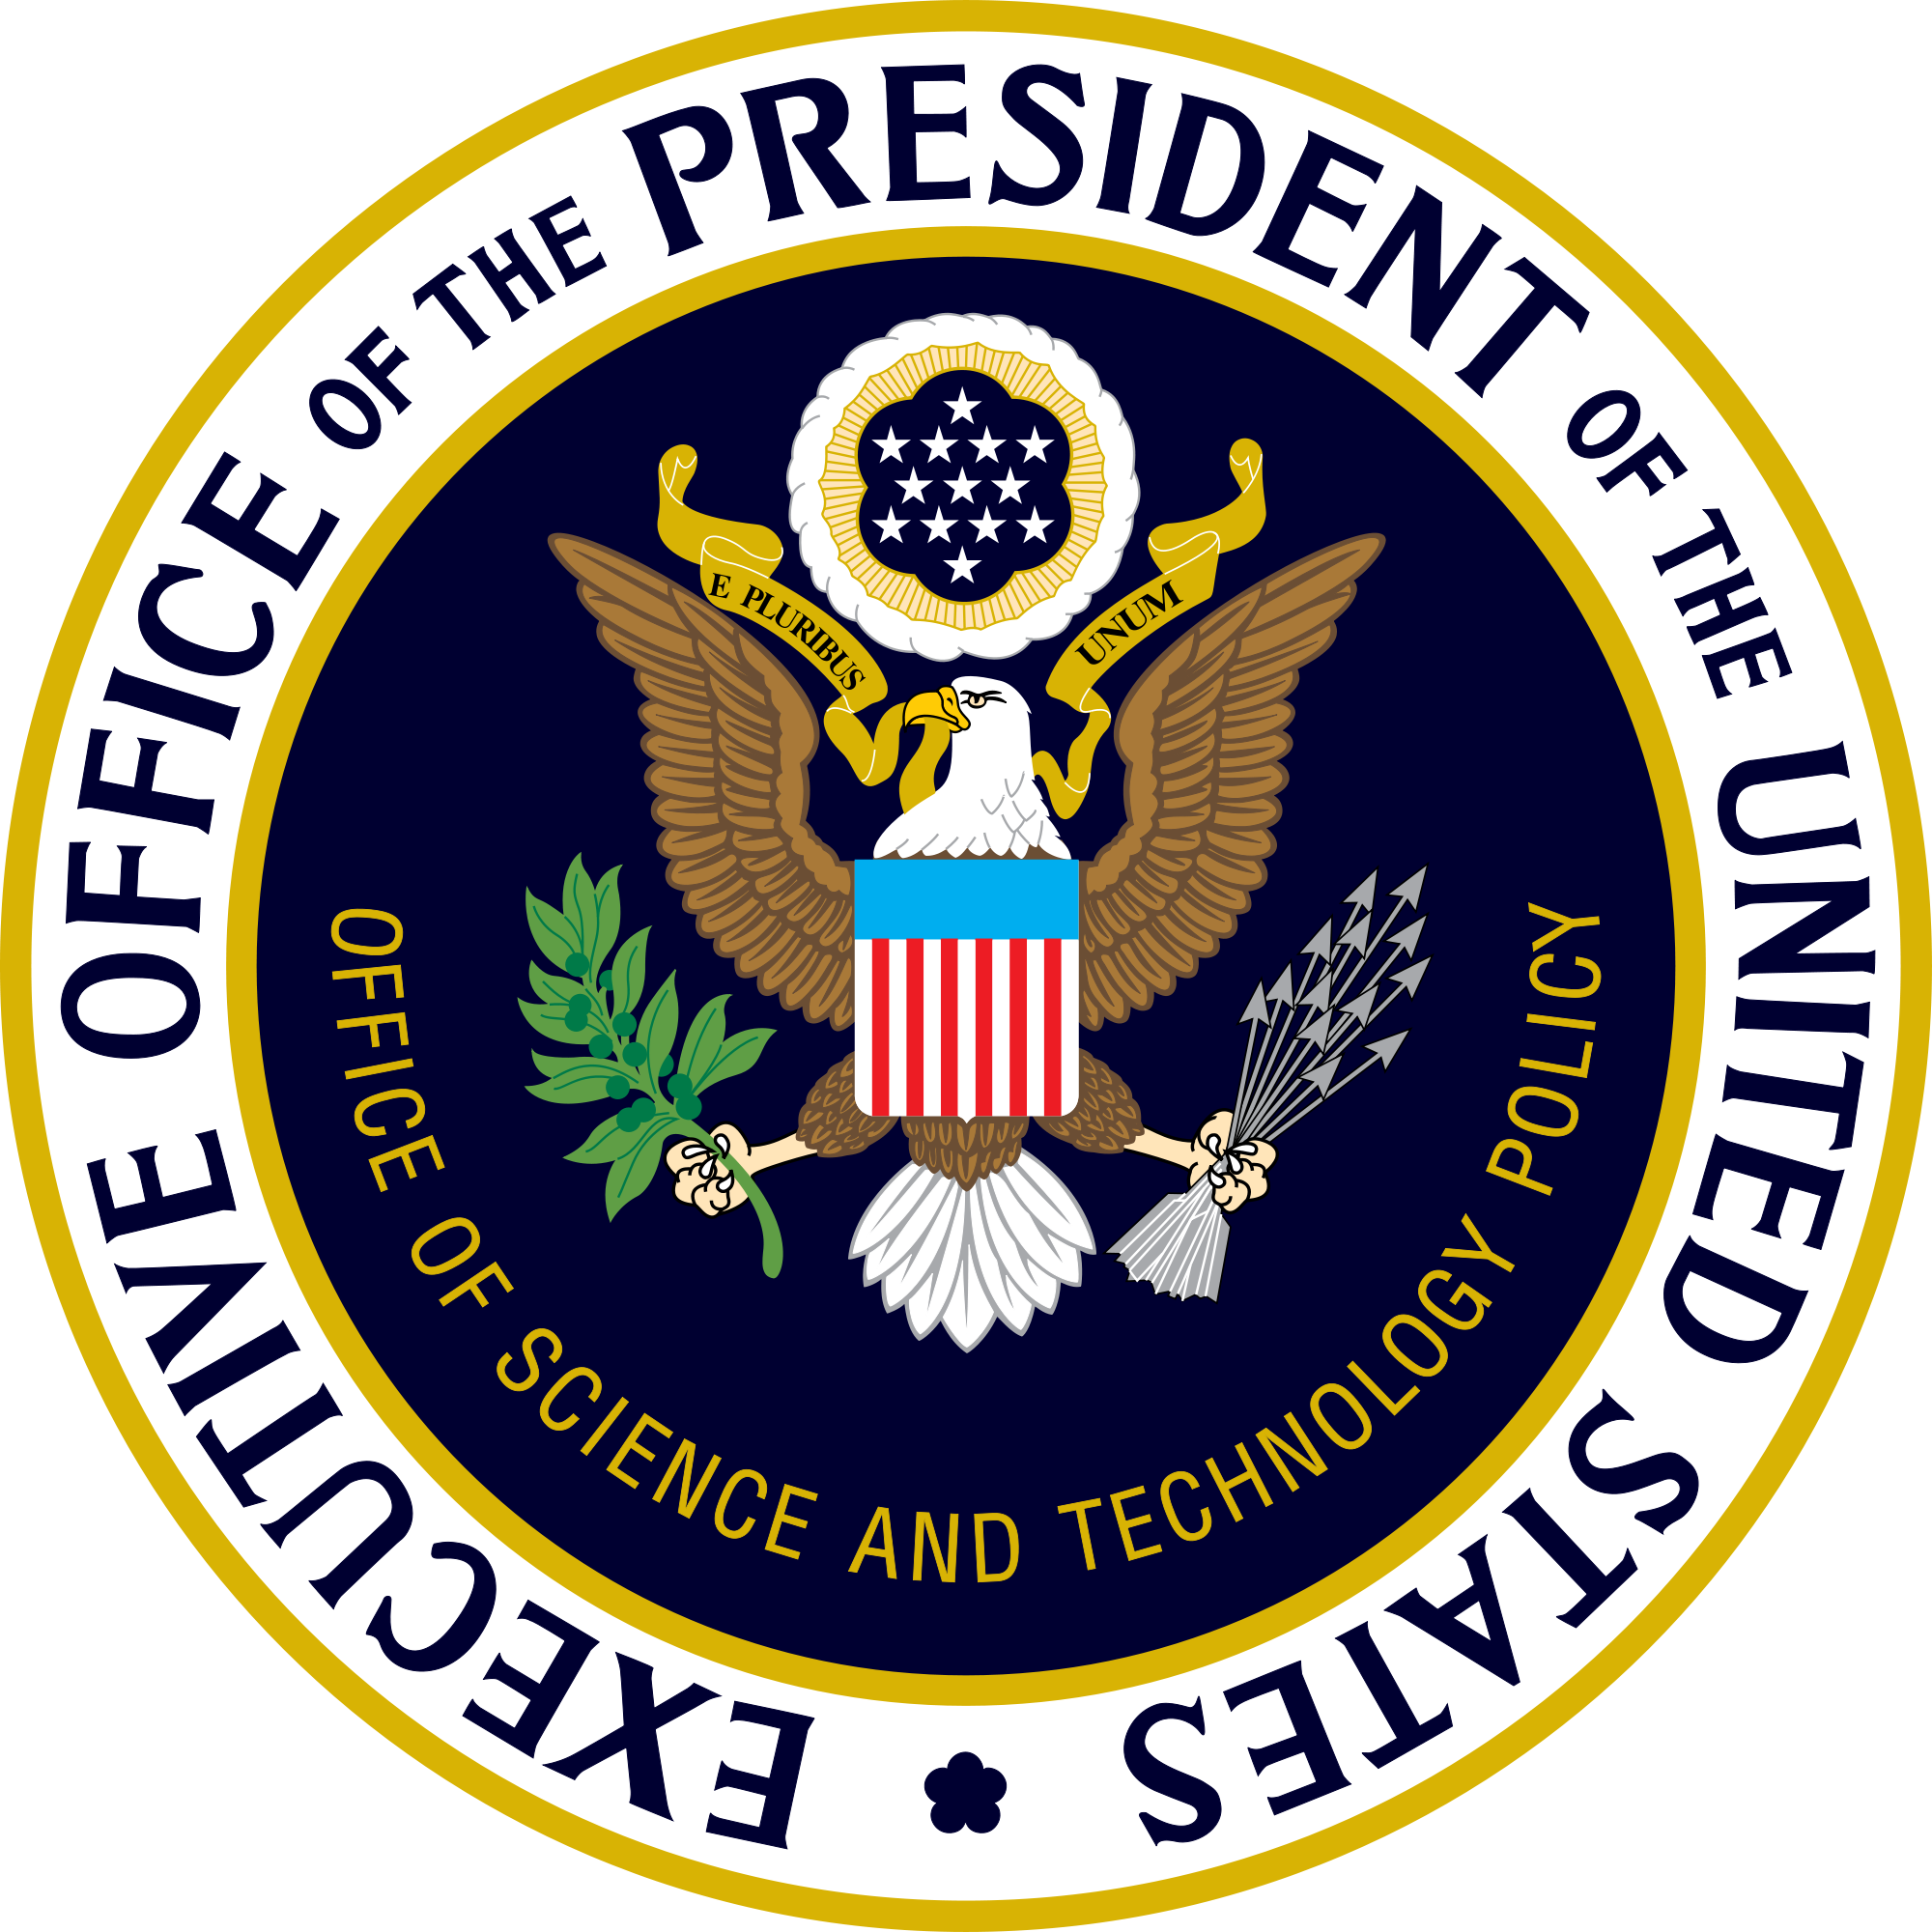 National Science and Technology Council (NSTC) logo